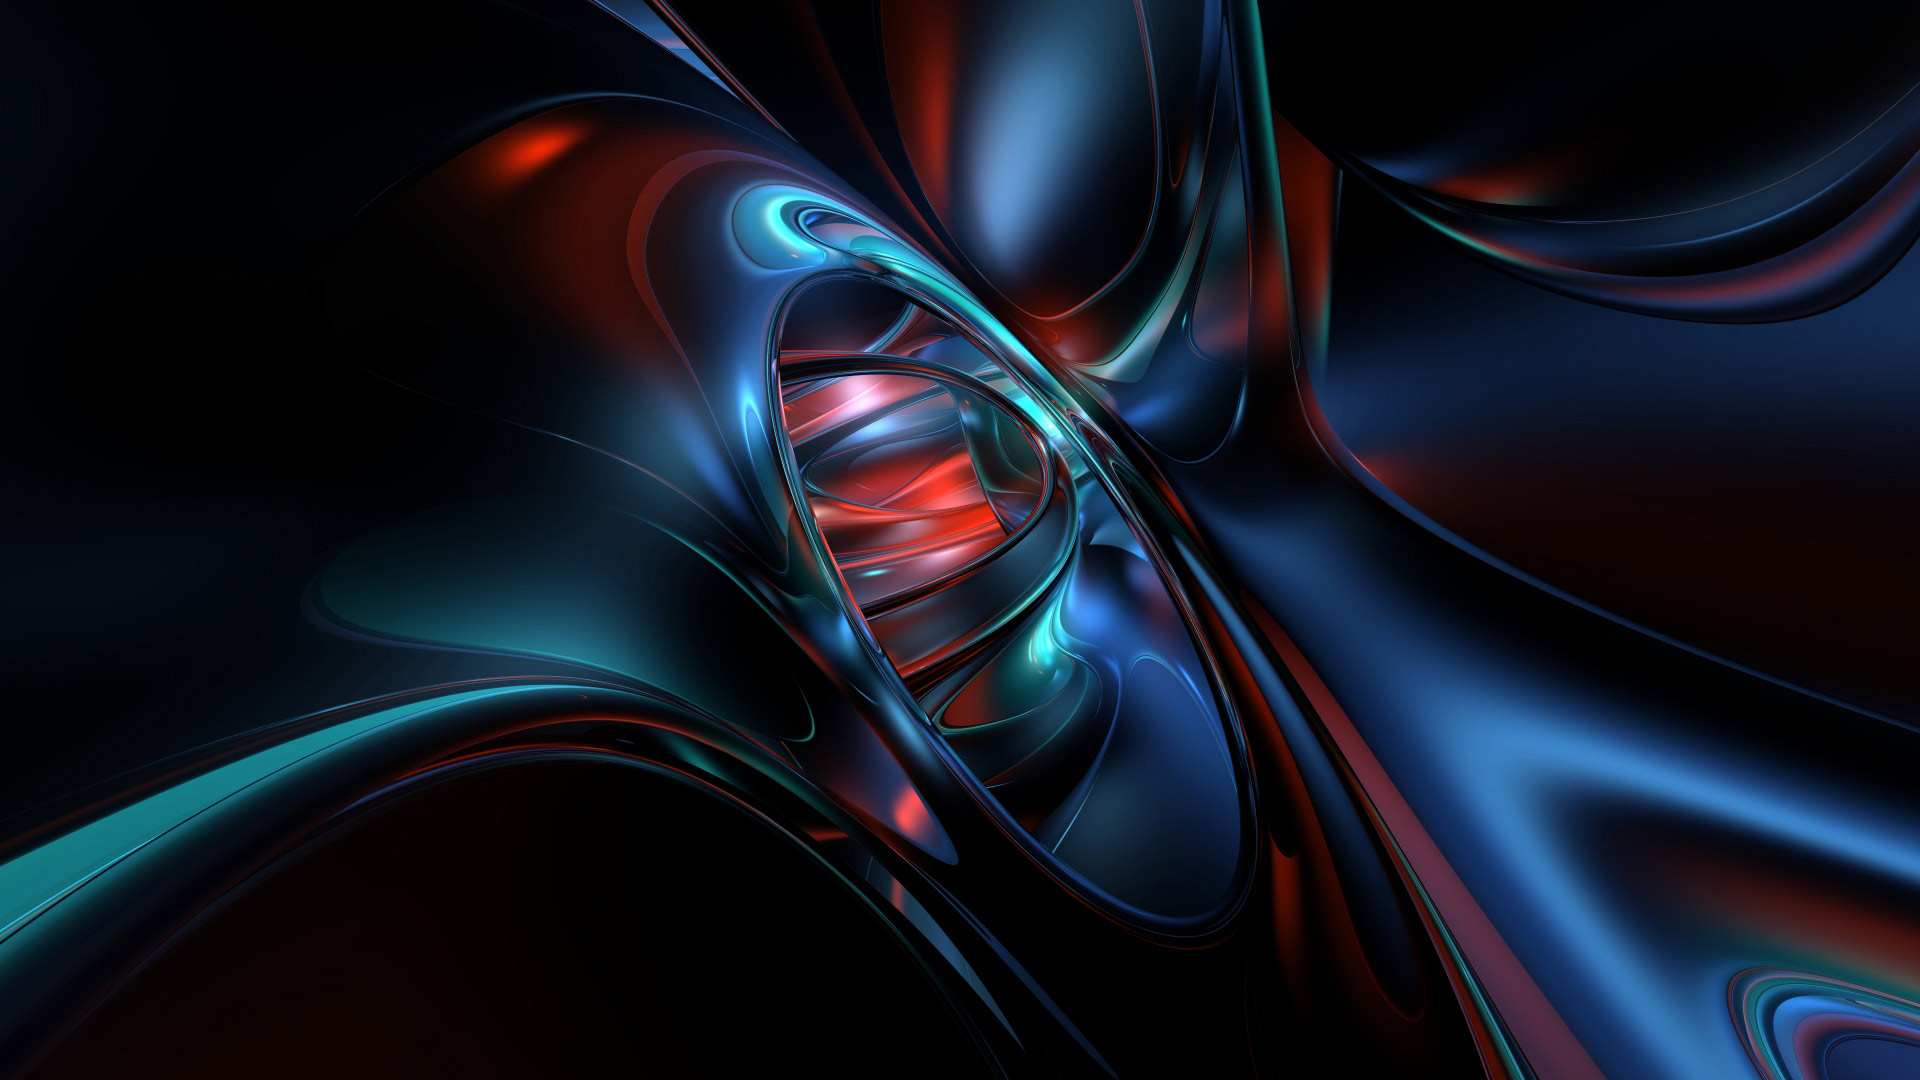 Red Teal And Black Abstract Wallpaper Full 1080p Ultra HD